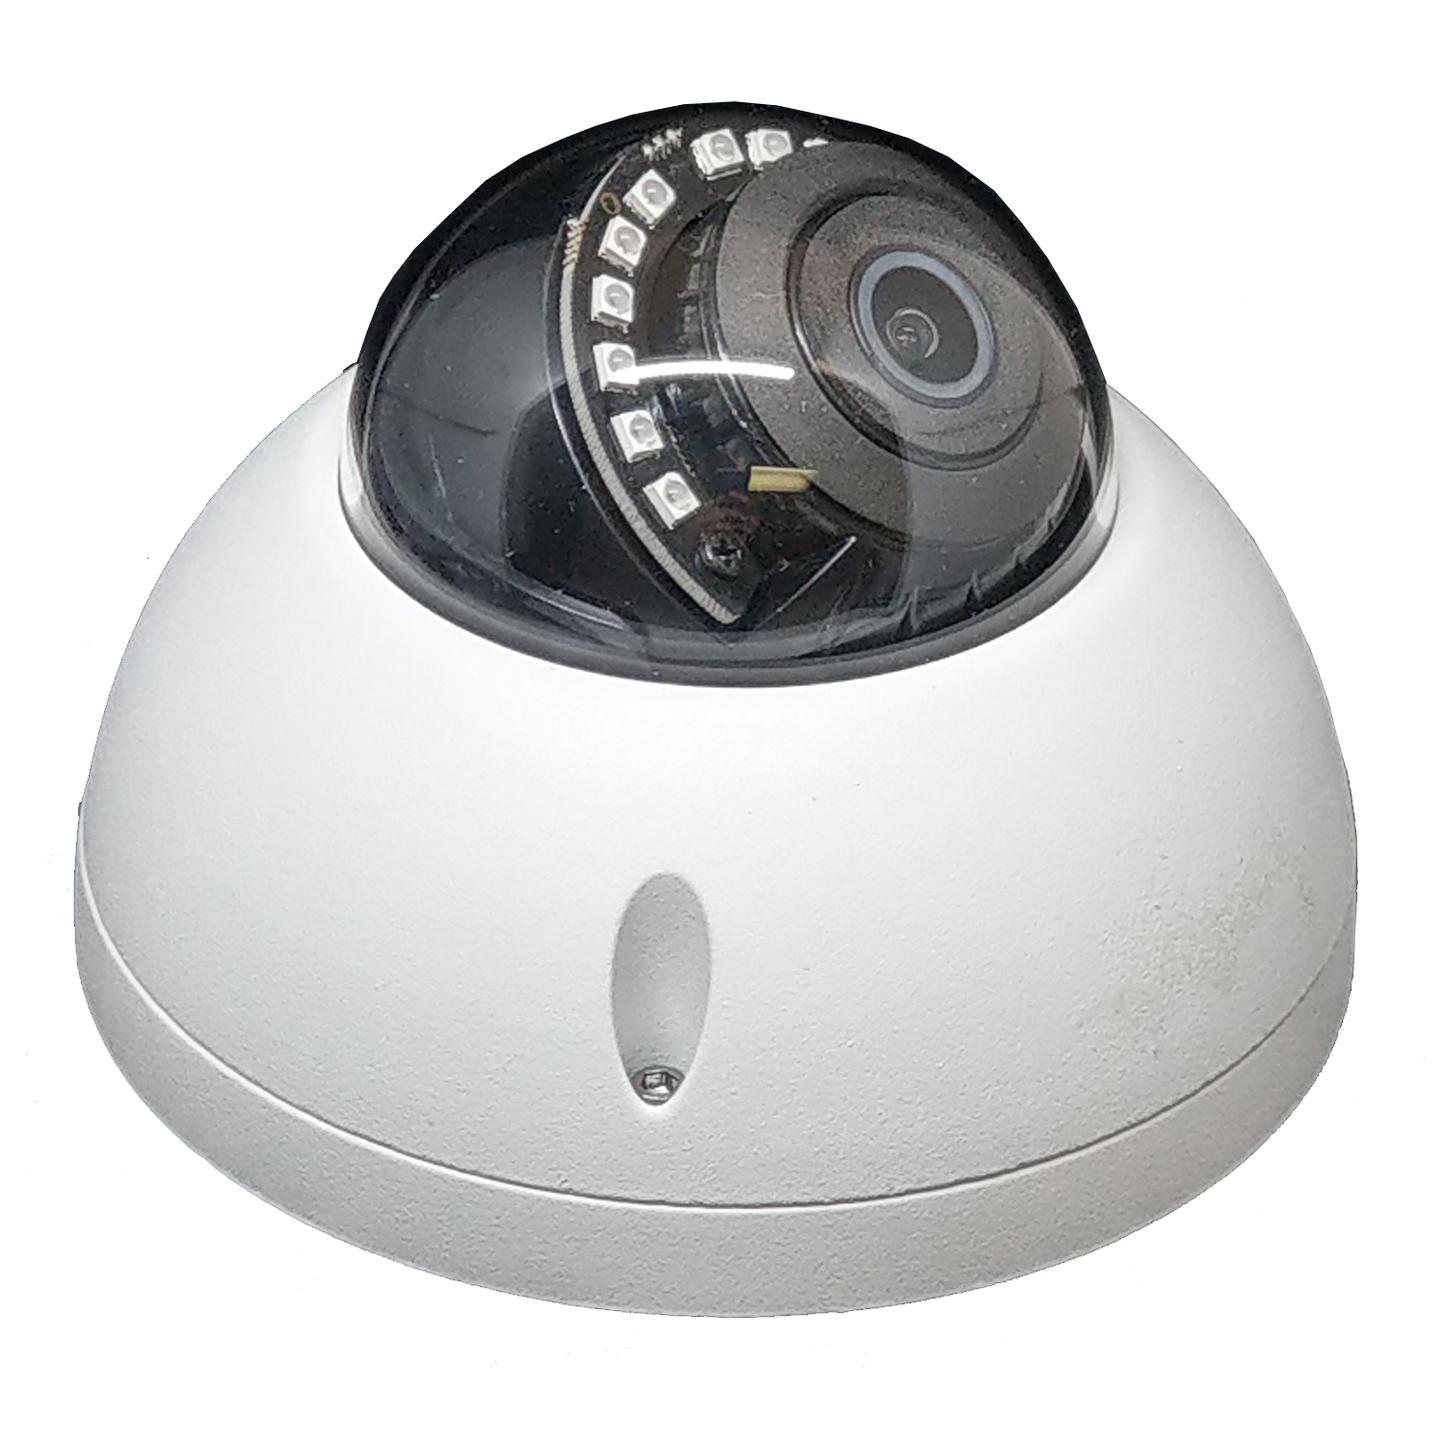 [FDT2-28M] APPRO 2.8mm Fixed Lens Dome Outdoor Surveillance Camera, 1080P Full HD, 2.4MP 4in1 (TVI/AHD/CVI/CVBS), Smart IR Tech, Analog CCTV Security Camera, Metal, White, TEL Live Local Service